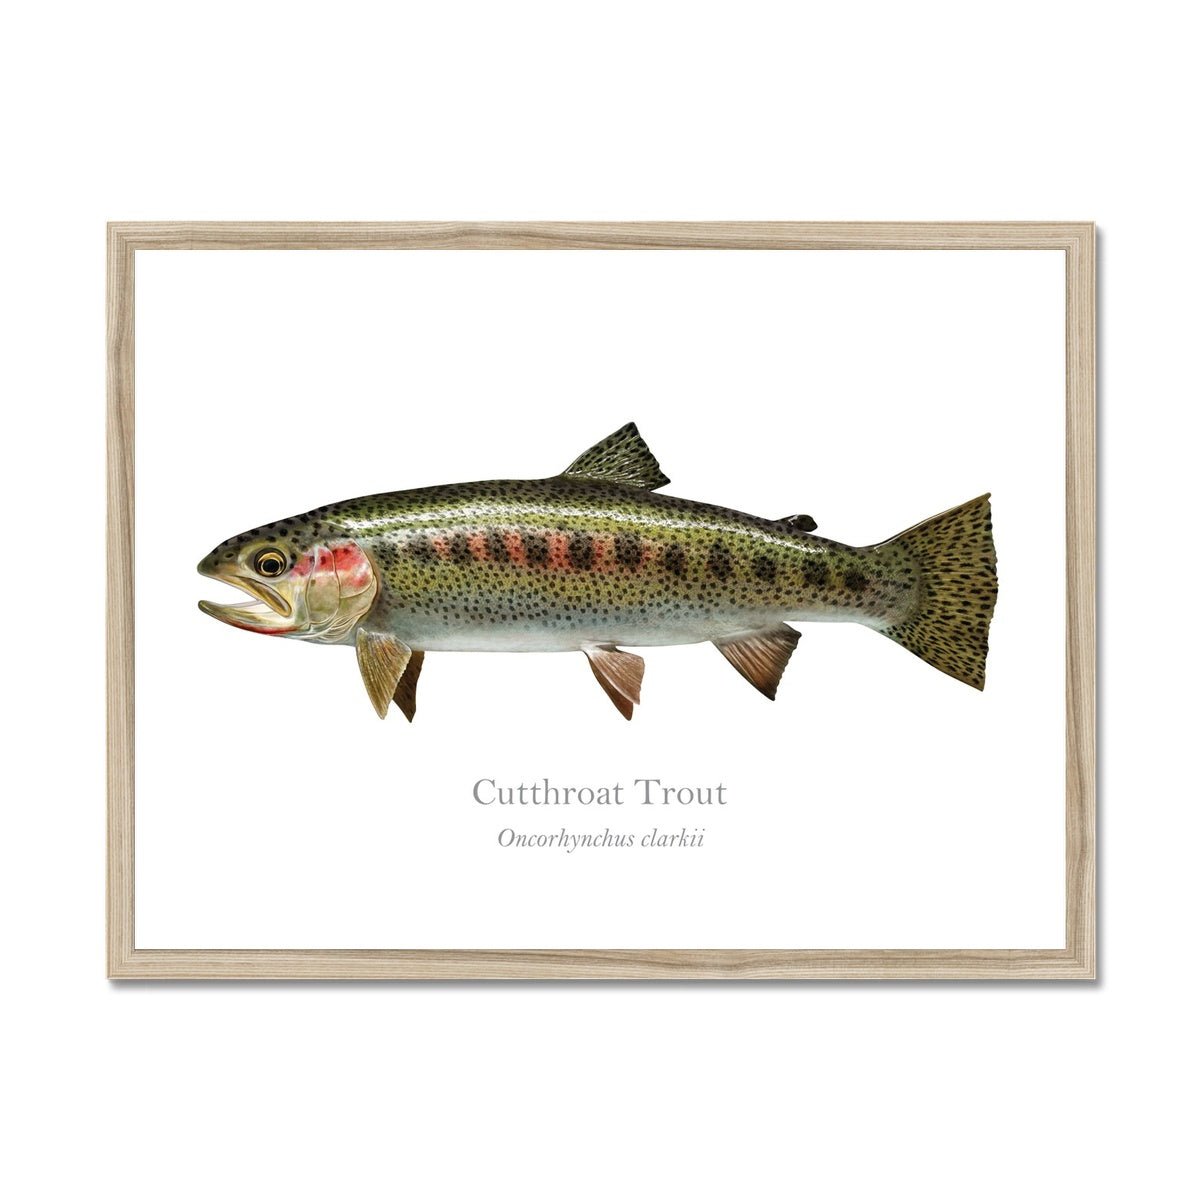 Cutthroat Trout - Framed Print - With Scientific Name - madfishlab.com